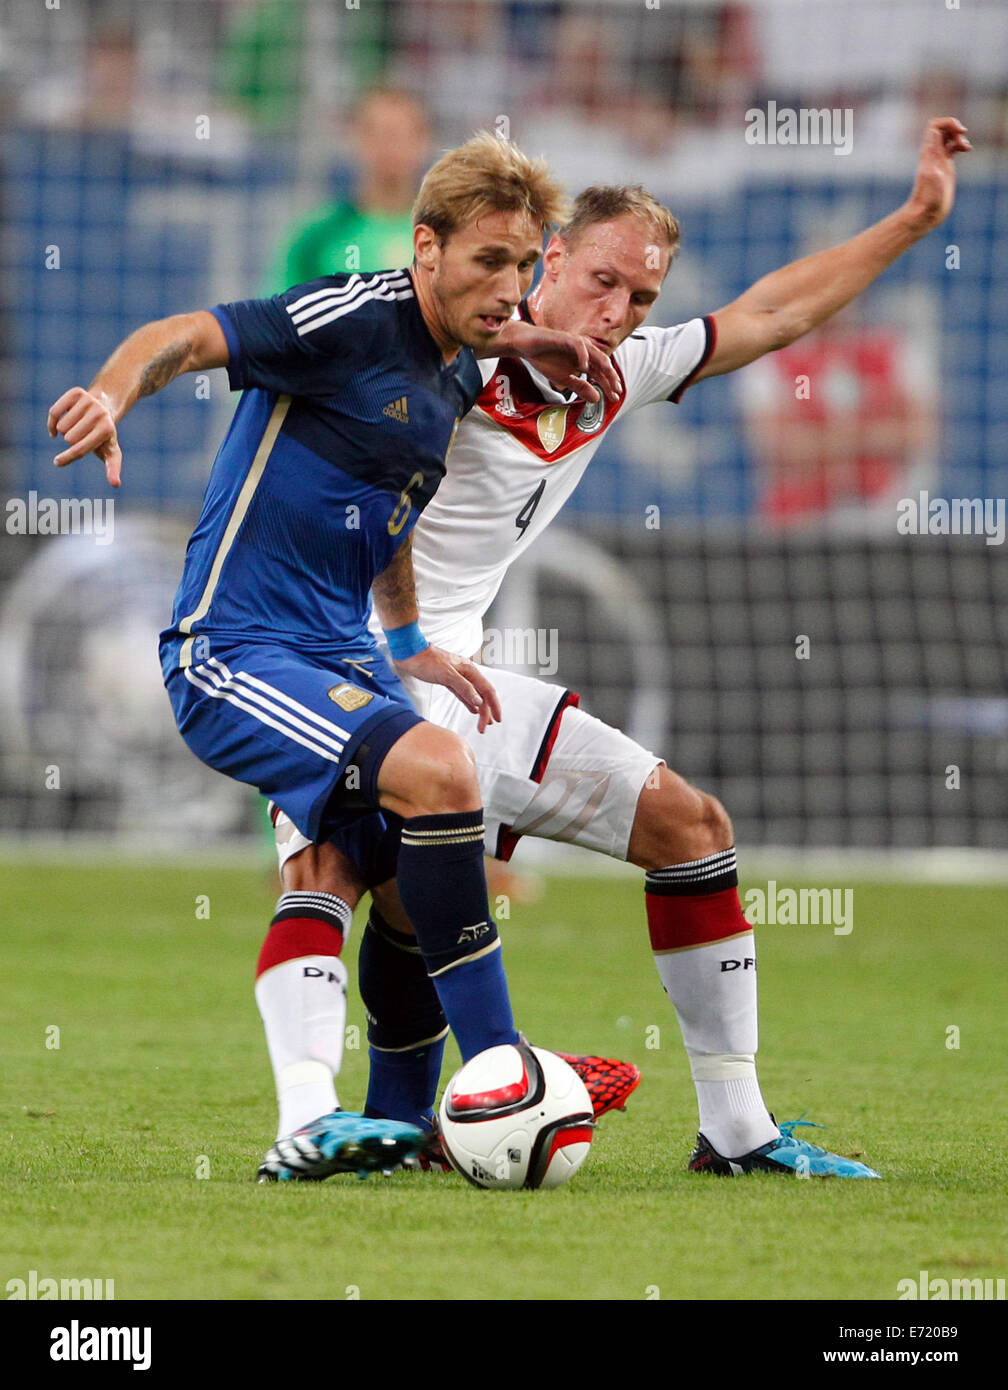 Duesseldorf, Germany. 03rd Sep, 2014. Germany's Benedikt Hoewedes (BACK) and Argentina's Lucas Biglia vie for the ball during international soccer match between Germany and Argentina at Esprit arena in Duesseldorf, Germany, 03 September 2014. Photo: Roland Weihrauch/dpa/Alamy Live News Stock Photo